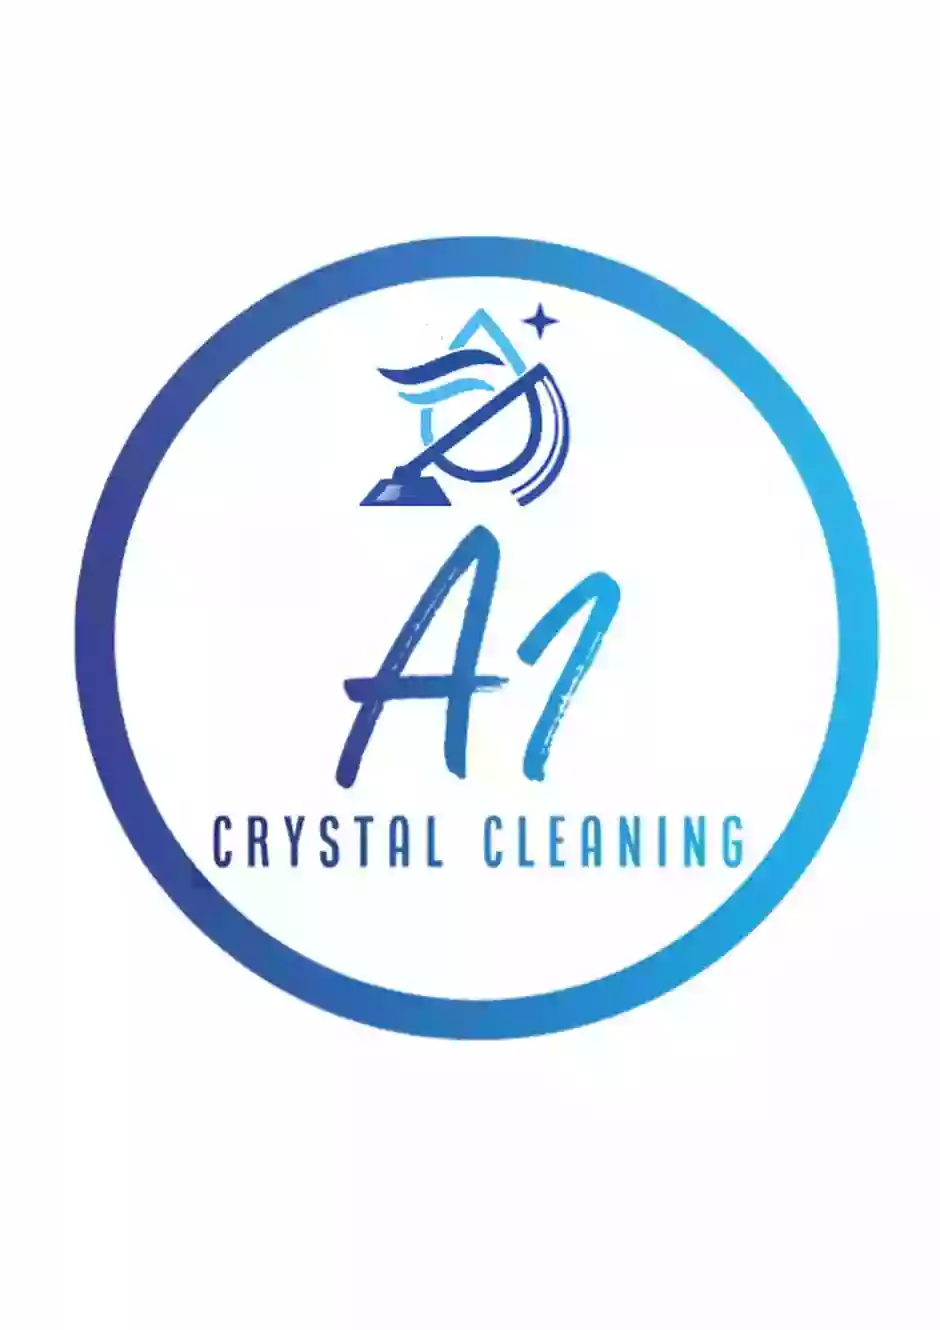 A1 CRYSTAL CLEANING